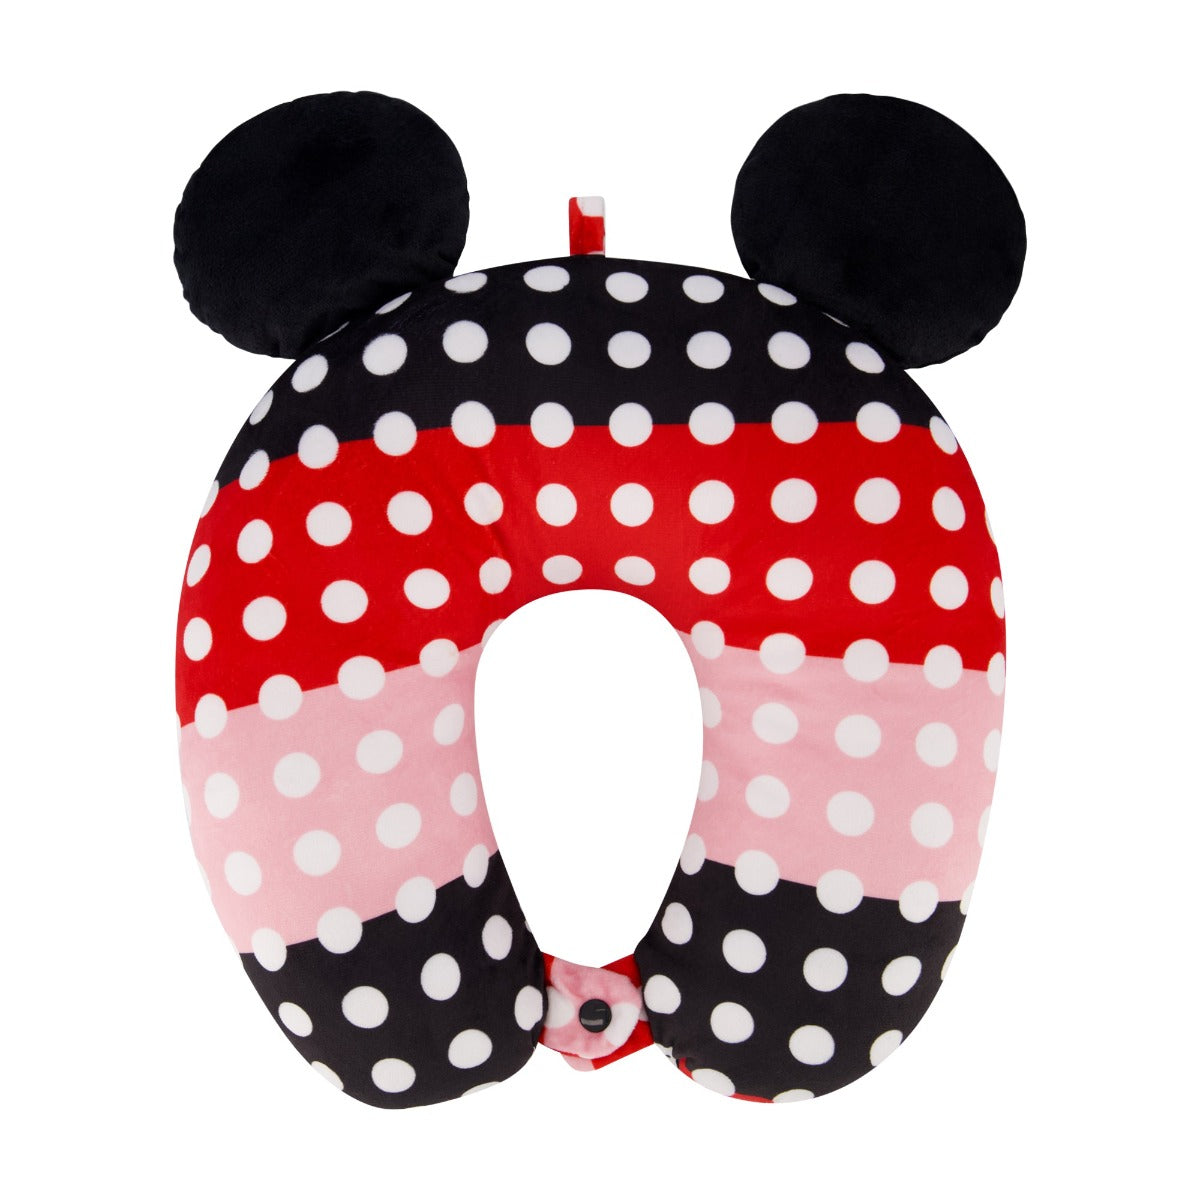 Ful disney minnie mouse three color polka dot ears neck pillow red black pink - best travel pillows for support